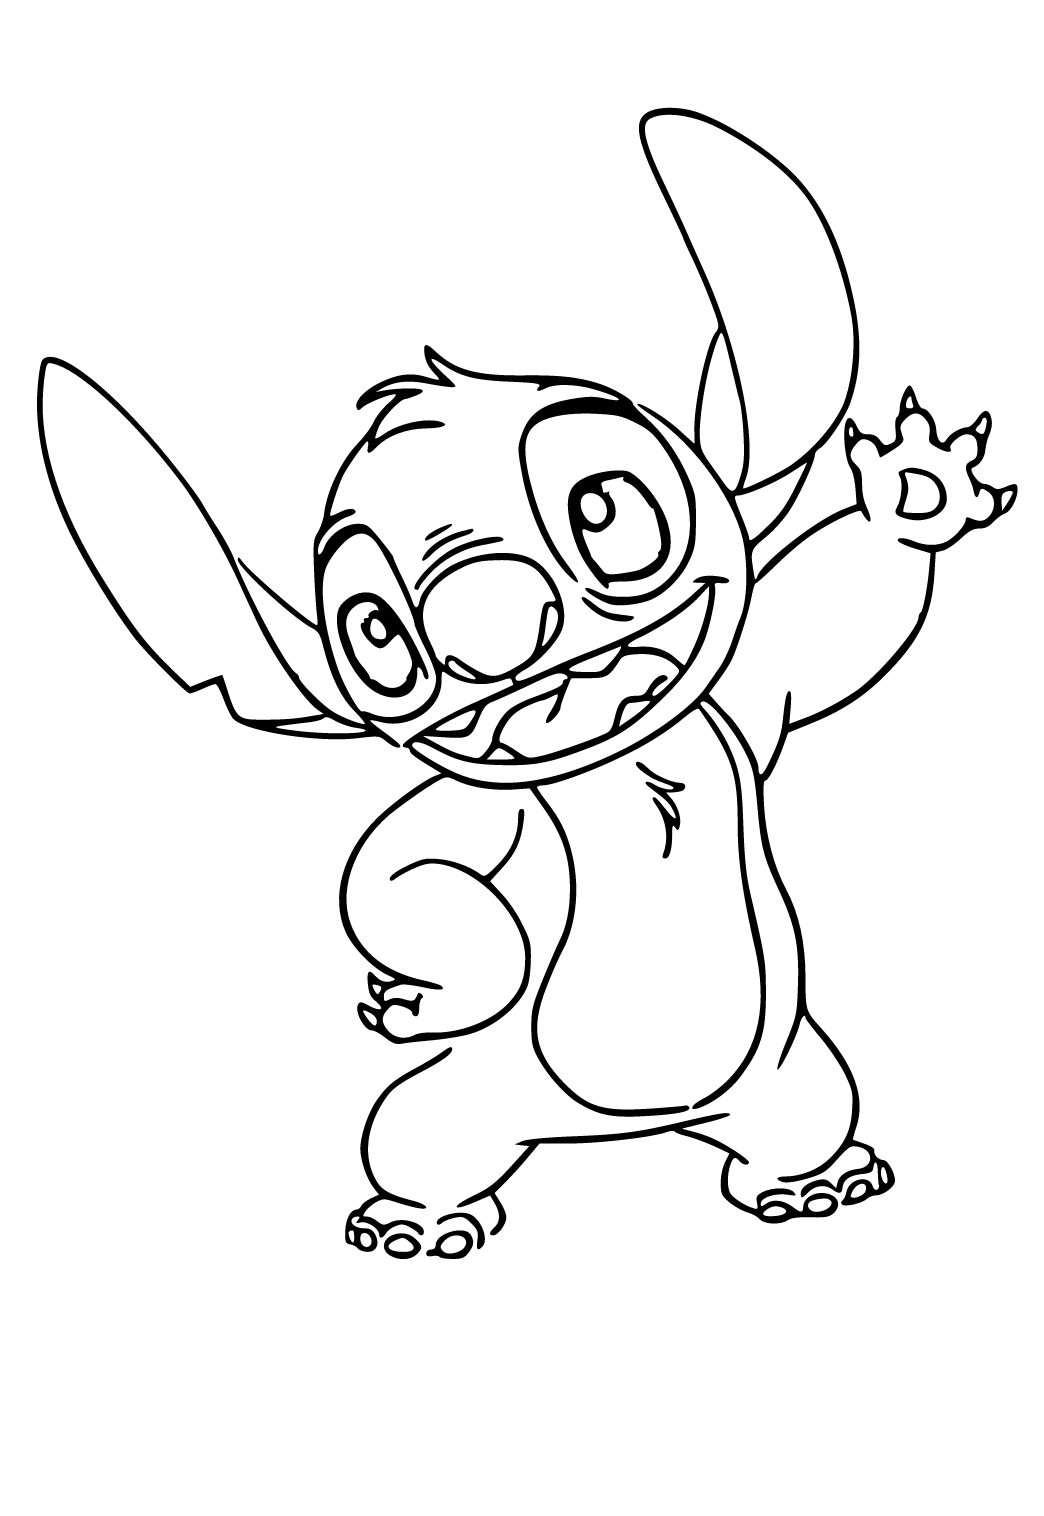 lilo-and-stitch-christmas-coloring-pages